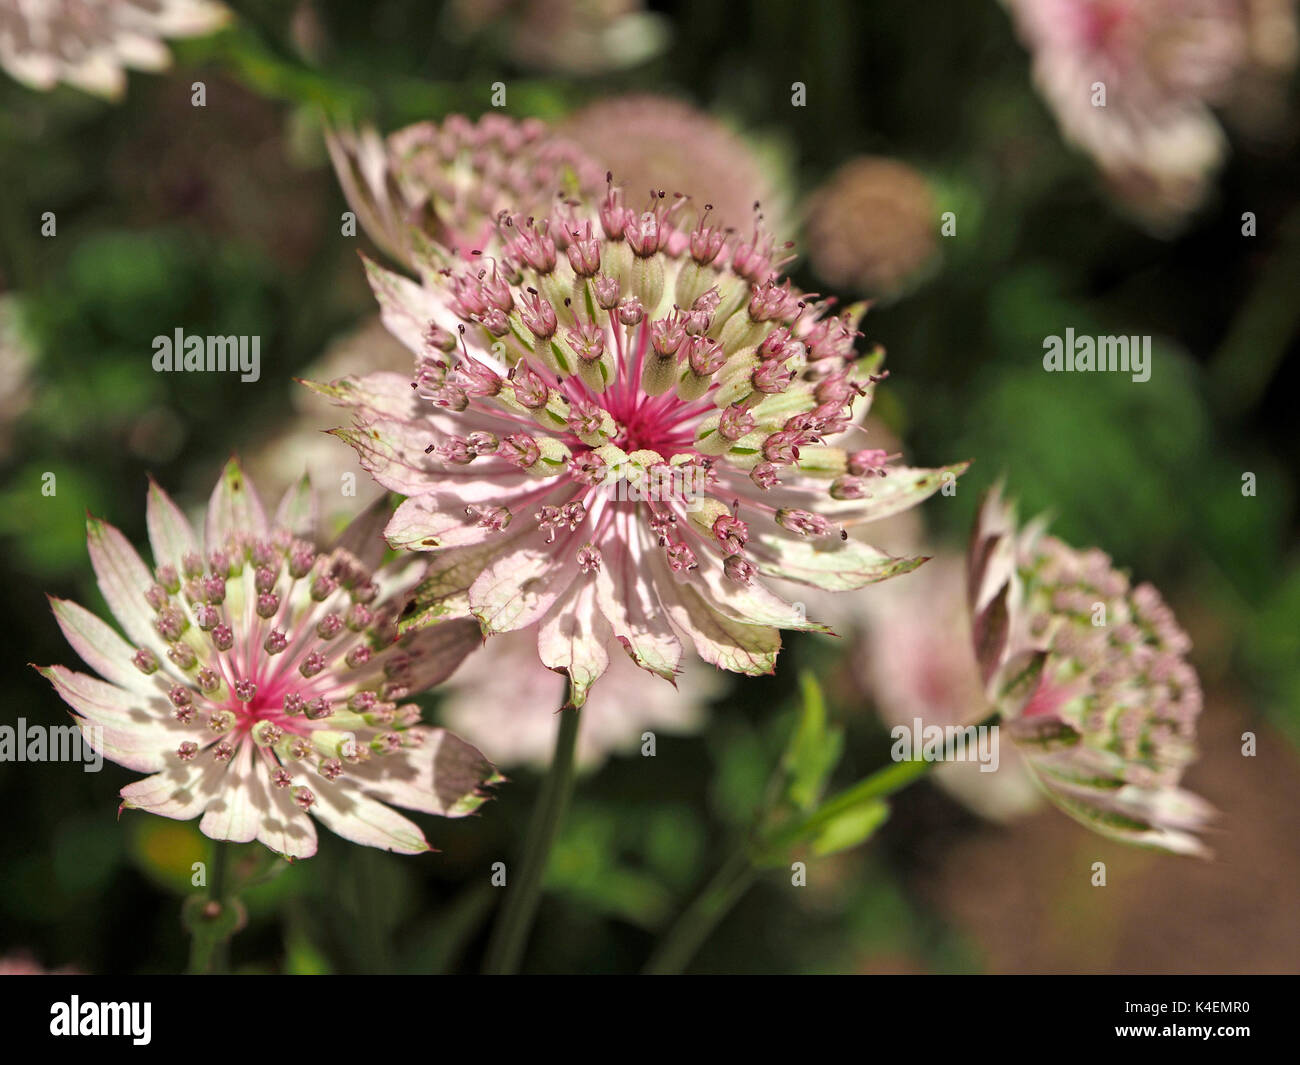 decorative pink and white flowers of Astrantia or Hattie's pincushion or Masterwort in Cumbria, England, UK Stock Photo